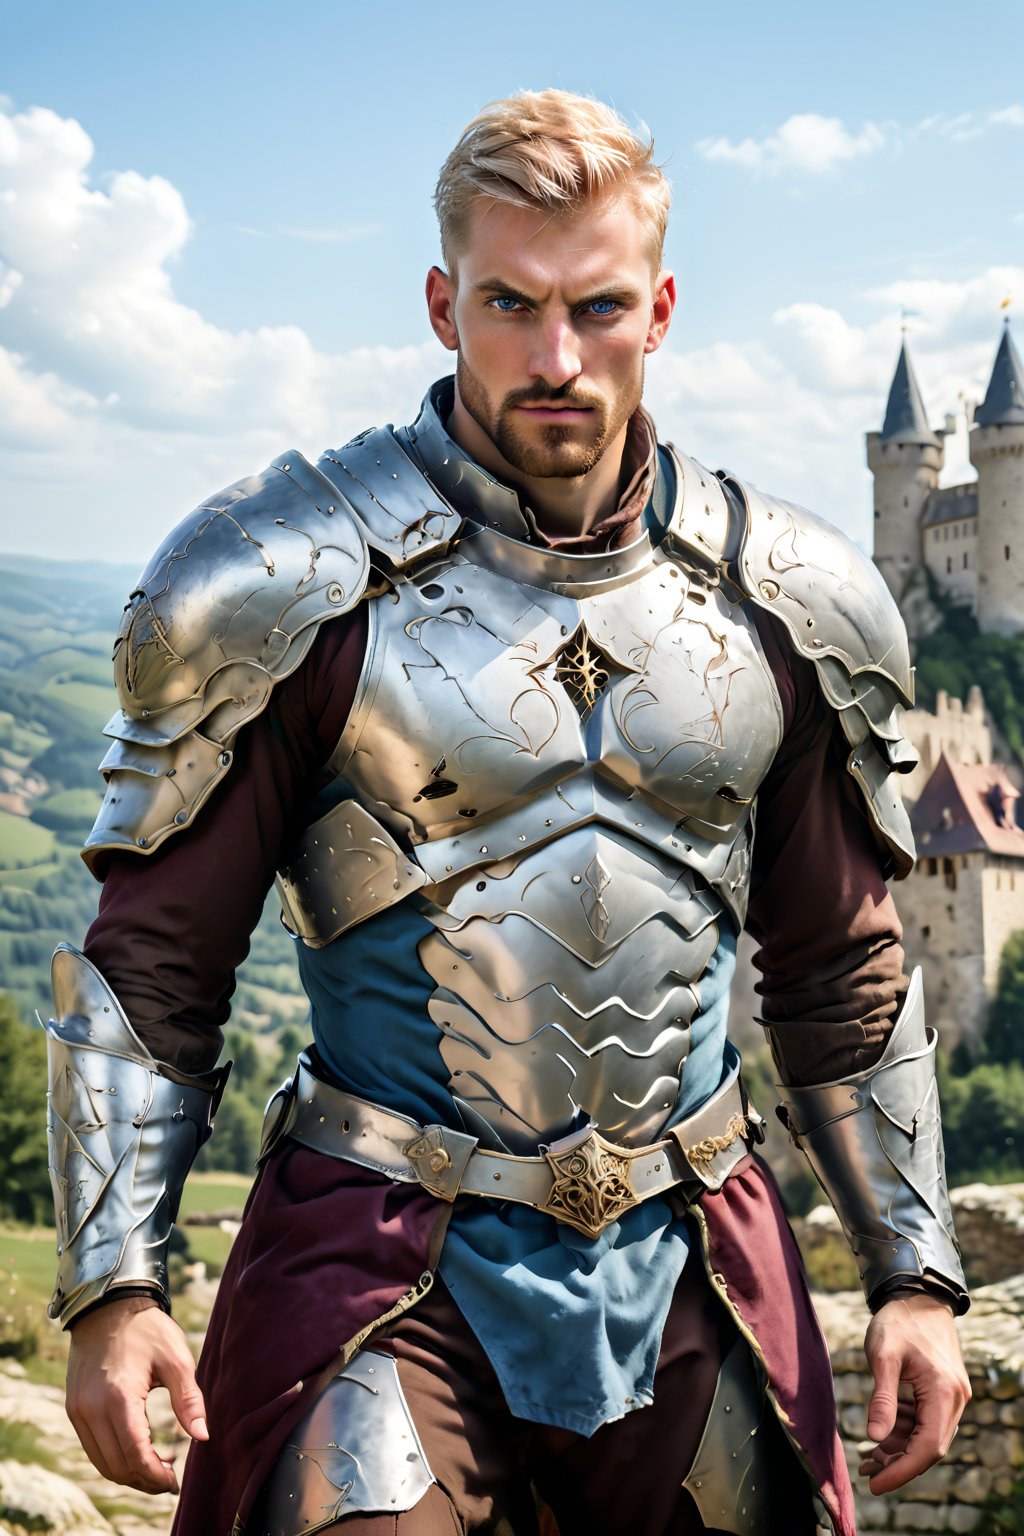 (truly medieval fantastic realism style, ancient, medieval theme:1.2), medieval masculine paladin male r0bbi3r0bbi3 realistic actor roleplaying as the medieval knight Quantum Crusader in the razed medieval kingdom: A dynamic shot of well-shaped realistic masculine r0bbi3r0bbi3 male actor person, clad in fully clothed white and dark-red medieval heropaladinwear, one hand in extremely perfectly-shaped realistic accurate gesture perspective anatomy matching scene, healthy, jovial, 27yearold, stands heroically amidst a swirling vortex of blue and purple energy. His pale skin glistens with a subtle sheen as he gazes intently into the distance, striking blue eyes, prominent cheekbones accentuating his determined expression. Short blonde hair is tousled by the temporal distortions surrounding him. Muscular physique rippling beneath his costume, r0bbi3r0bbi3's pose exudes confidence and strength. The background features a medieval fantasy kindgom landscape in disarray, trees medievalhourse castles structures warped and distorted as if torn from different eras of time, with the Quantum Crusader standing steadfast against the chaos.,r0bbi3r0bbi3